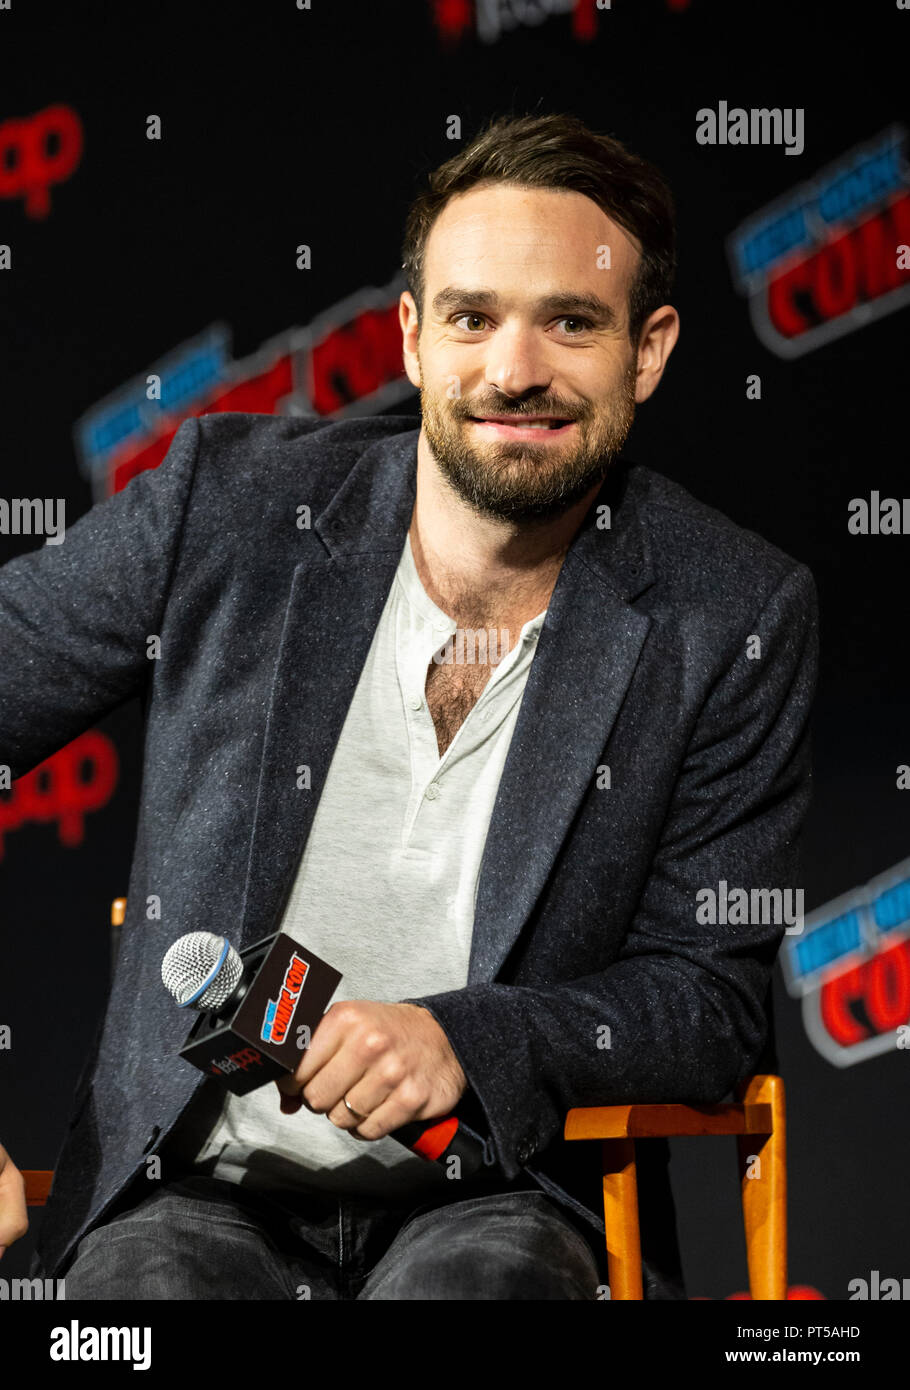 New York, NY - October 6, 2018: Charlie Cox attends Marvel's DAREDEVIL panel during New York Comic Con at Hulu Theater at Madison Square Garden Credit: lev radin/Alamy Live News Stock Photo